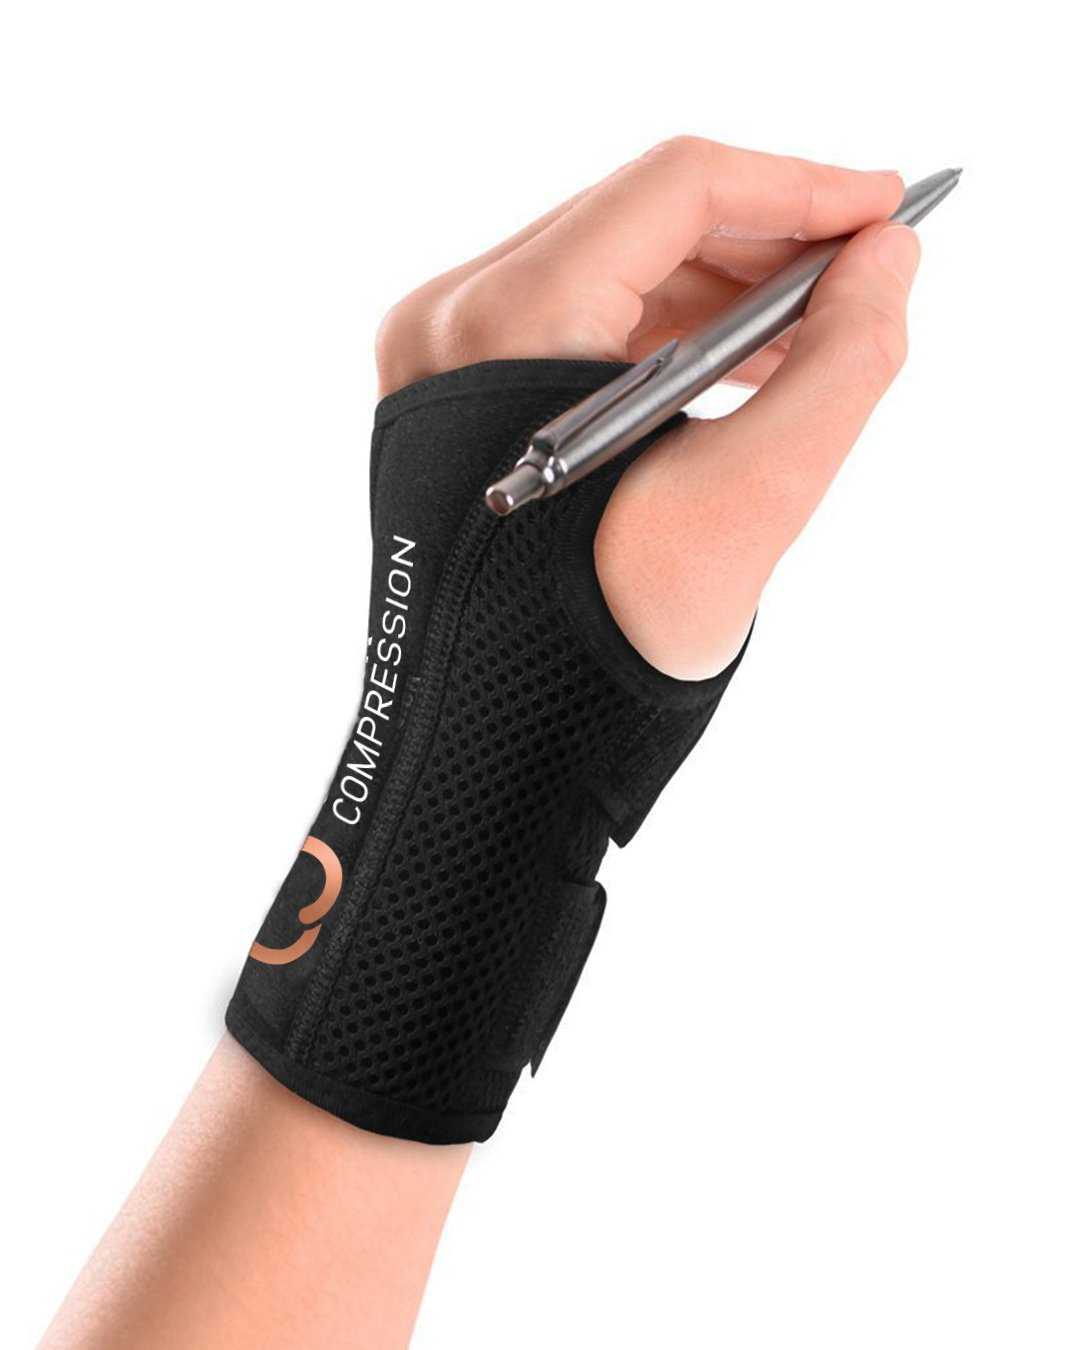 Copper Compression Wrist Brace - Copper Infused Adjustable Orthopedic Support  Splint for Pain, Carpal Tunnel, Arthritis, Tennis Elbow, Tendinitis, RSI,  Ganglion Cyst for Men Women - Left Hand - L/XL : 